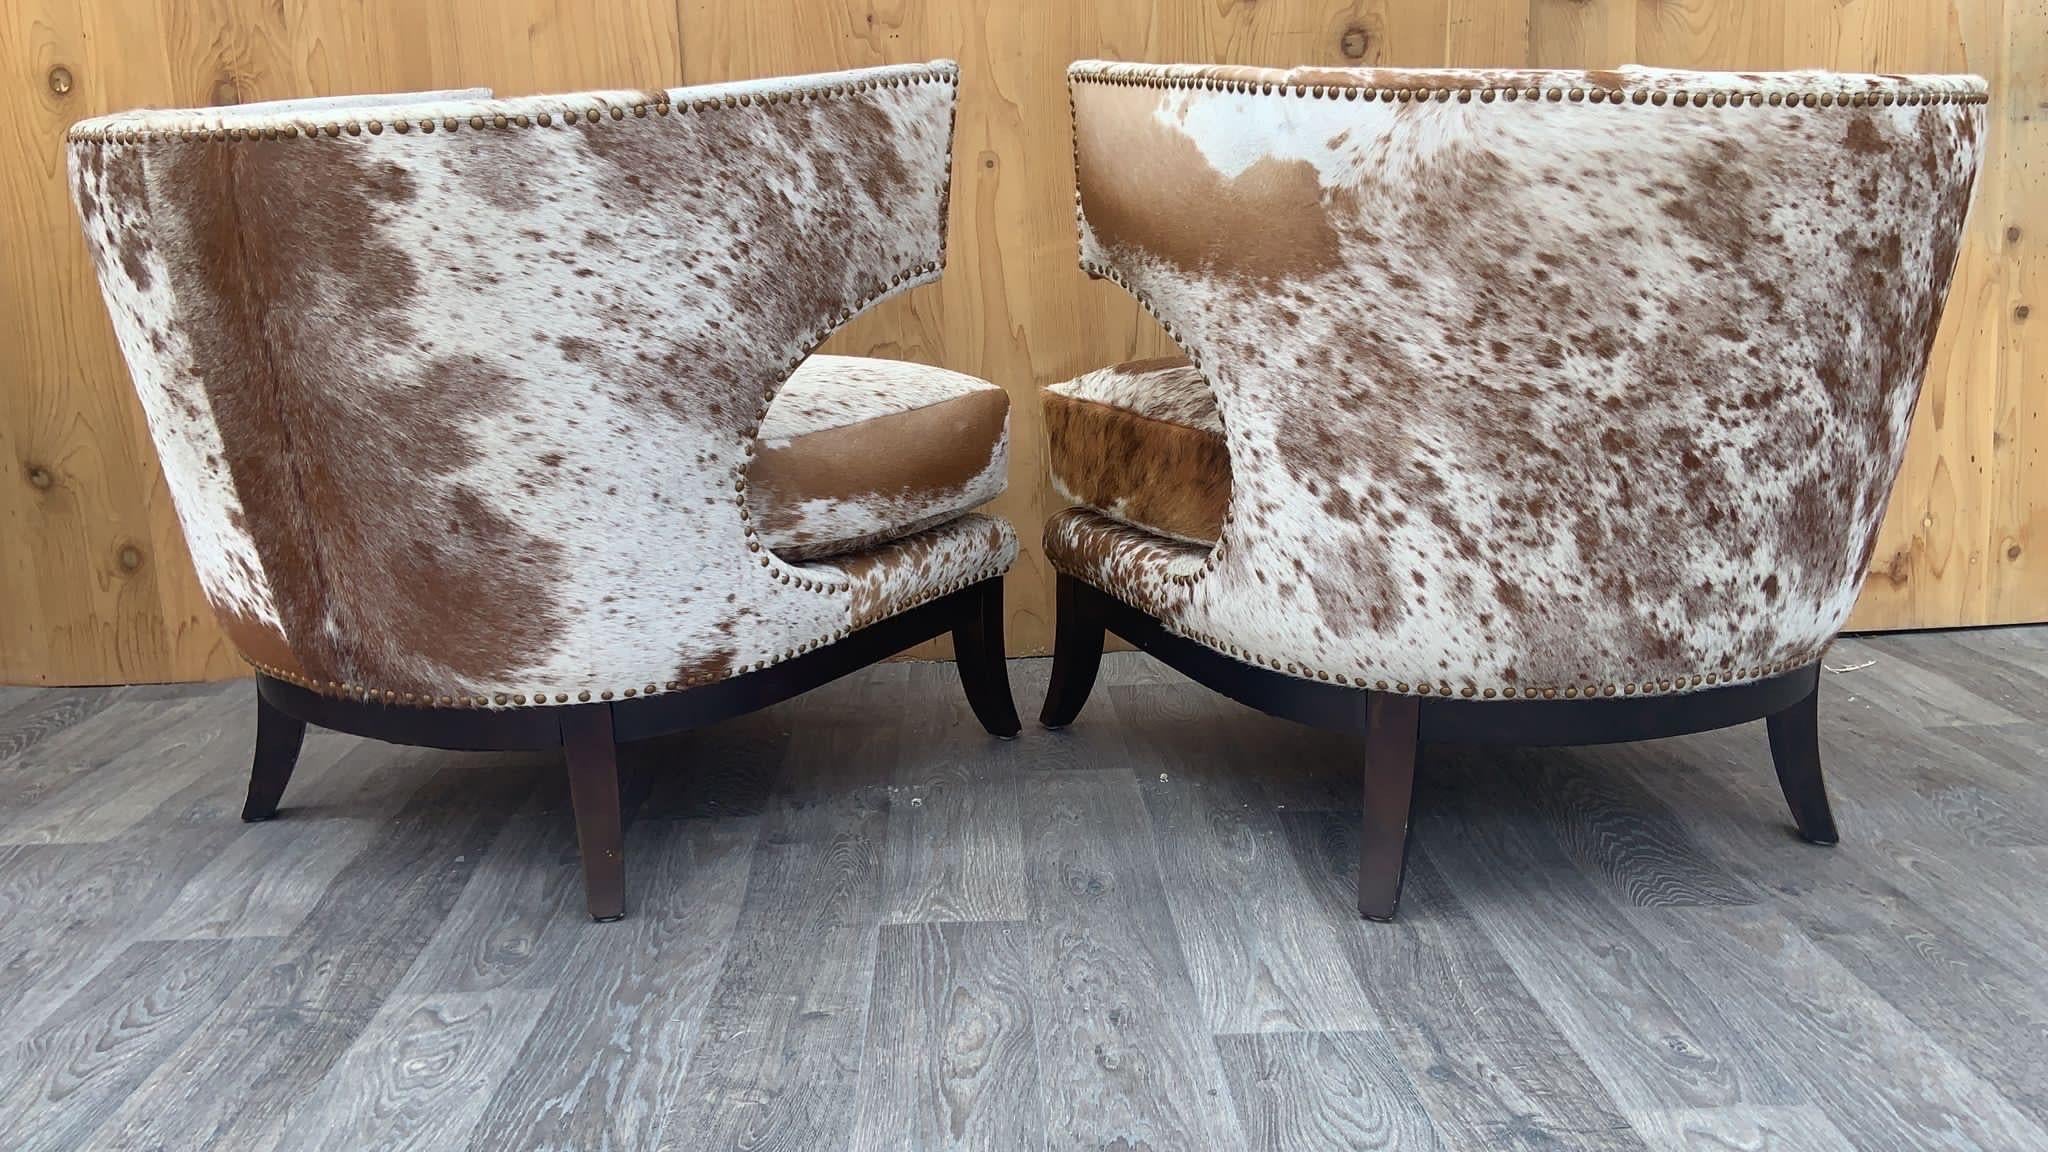 English Horseshoe Savoy Chairs Newly Upholstered in Brazilian Cowhide - Set of 2 1